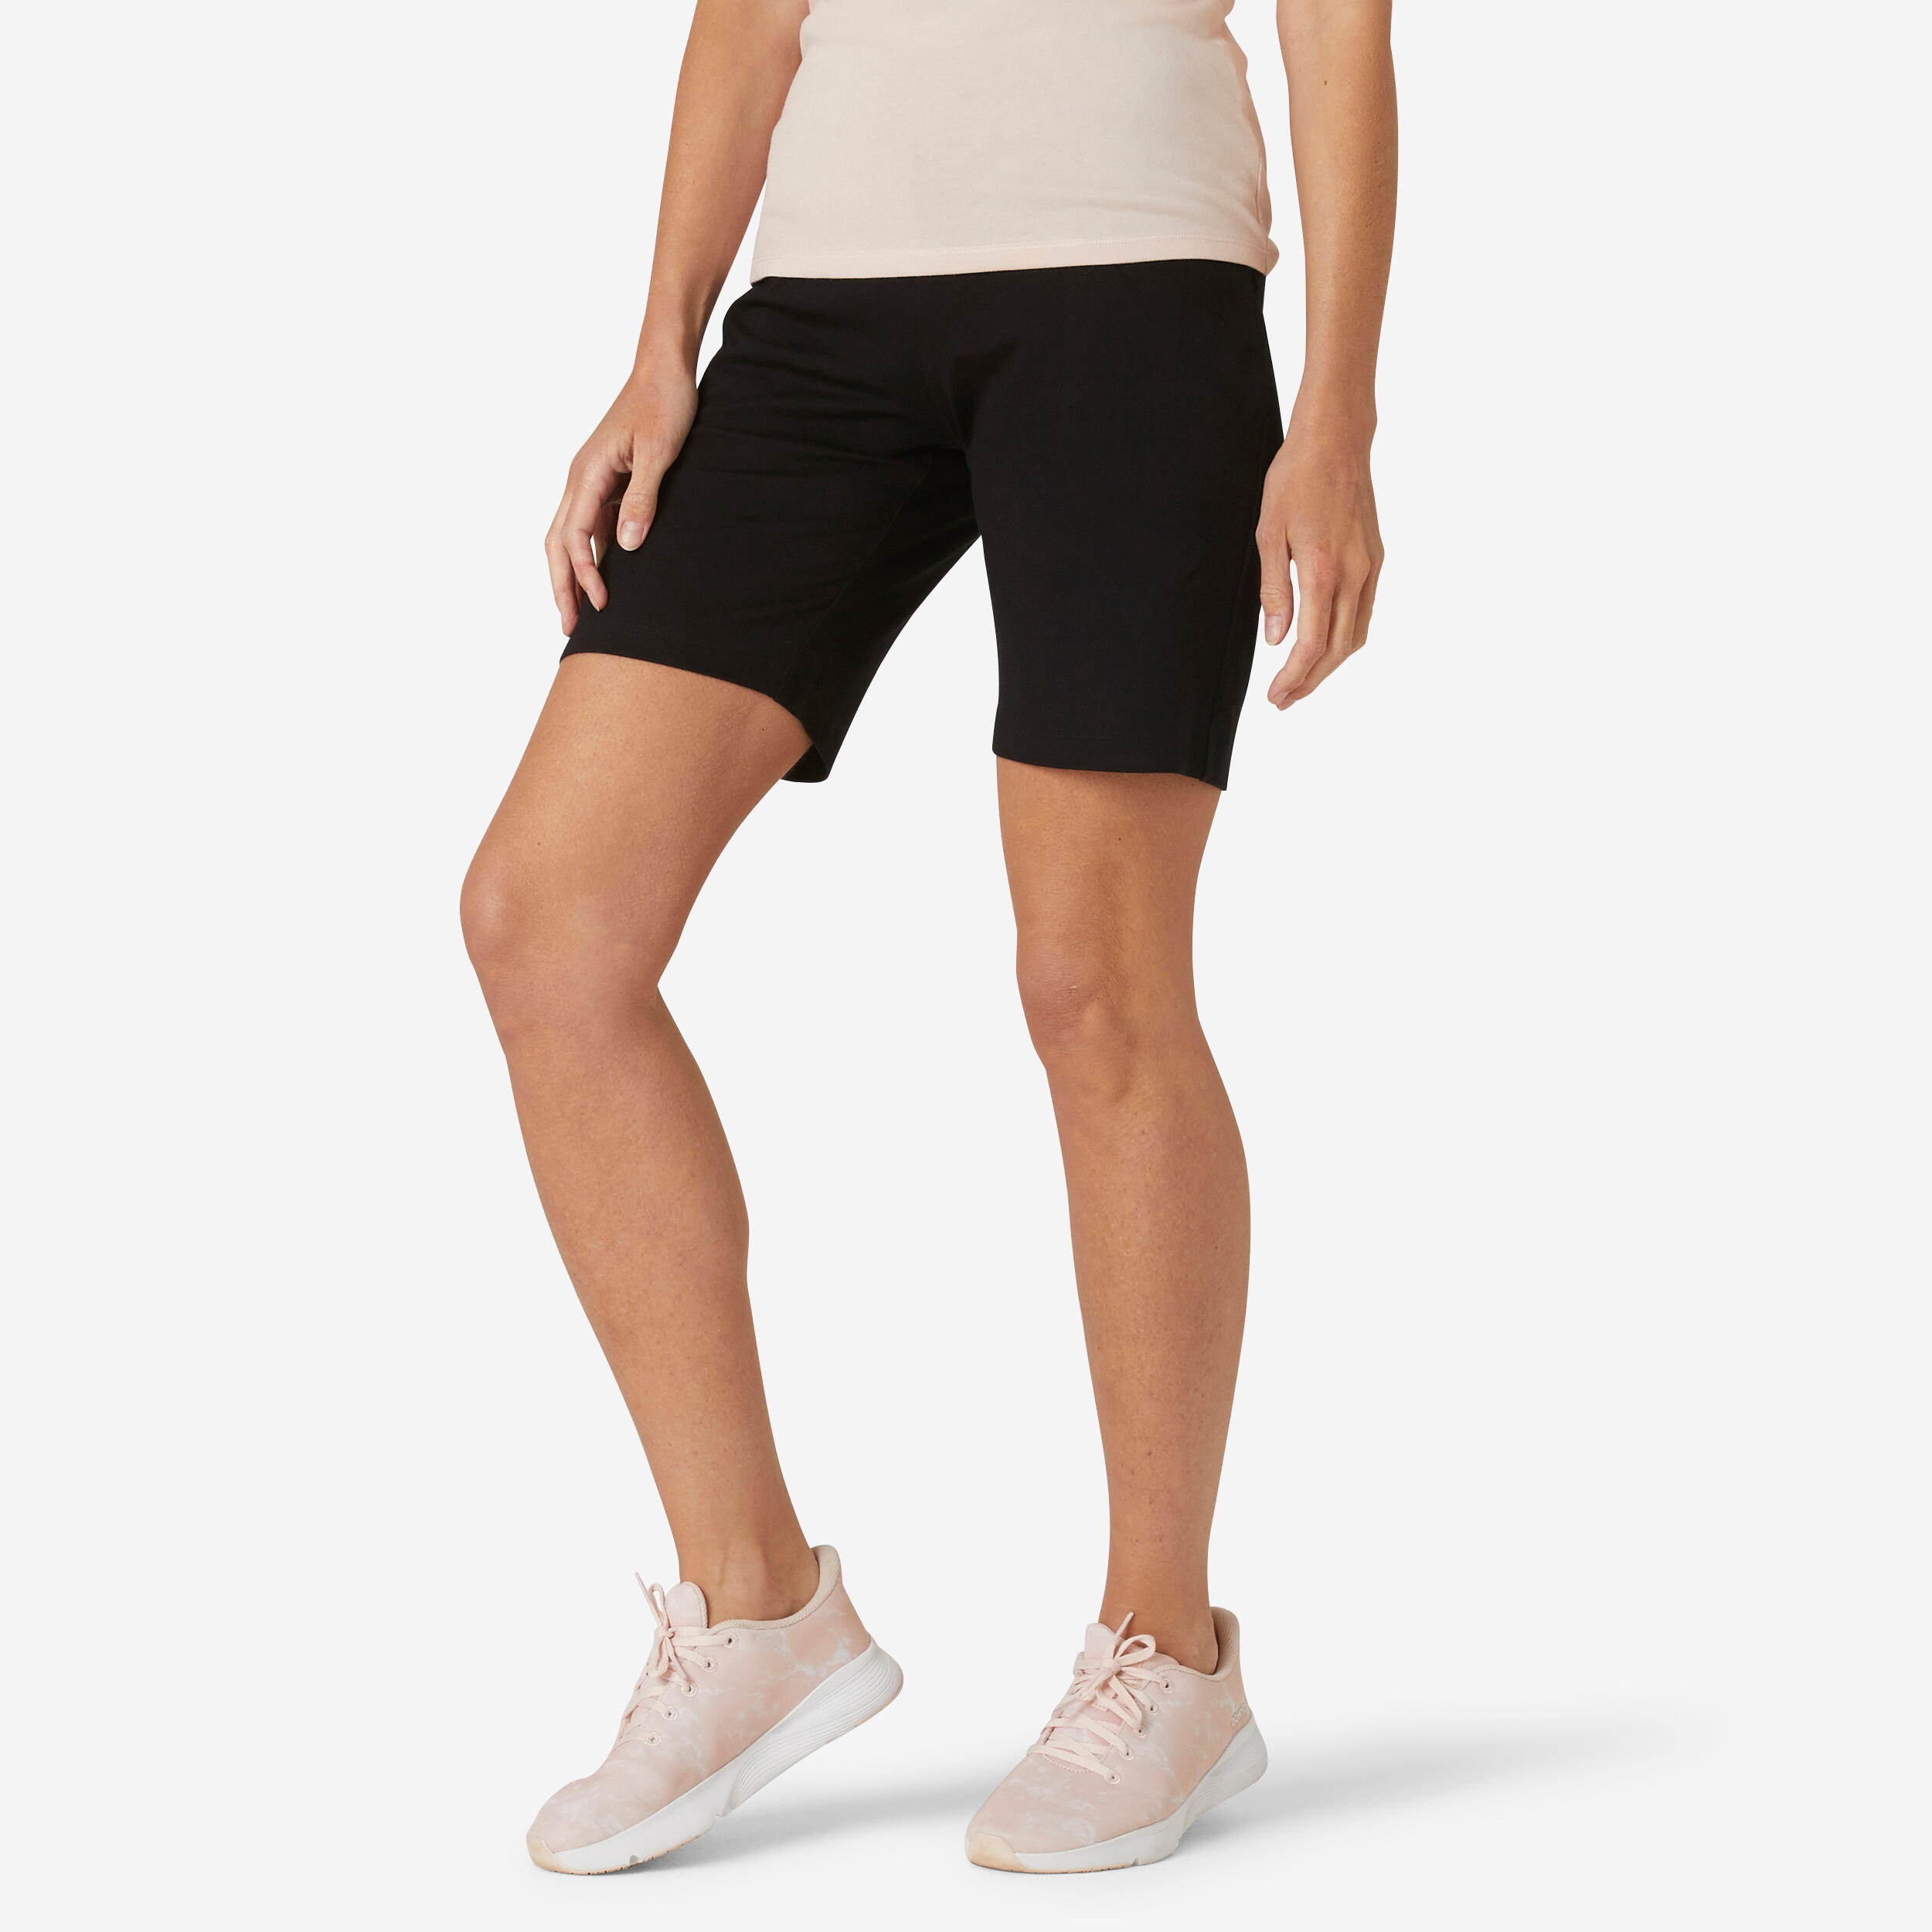 Women's Straight-Cut Fitness Shorts with Pockets 500 - Black 1/5